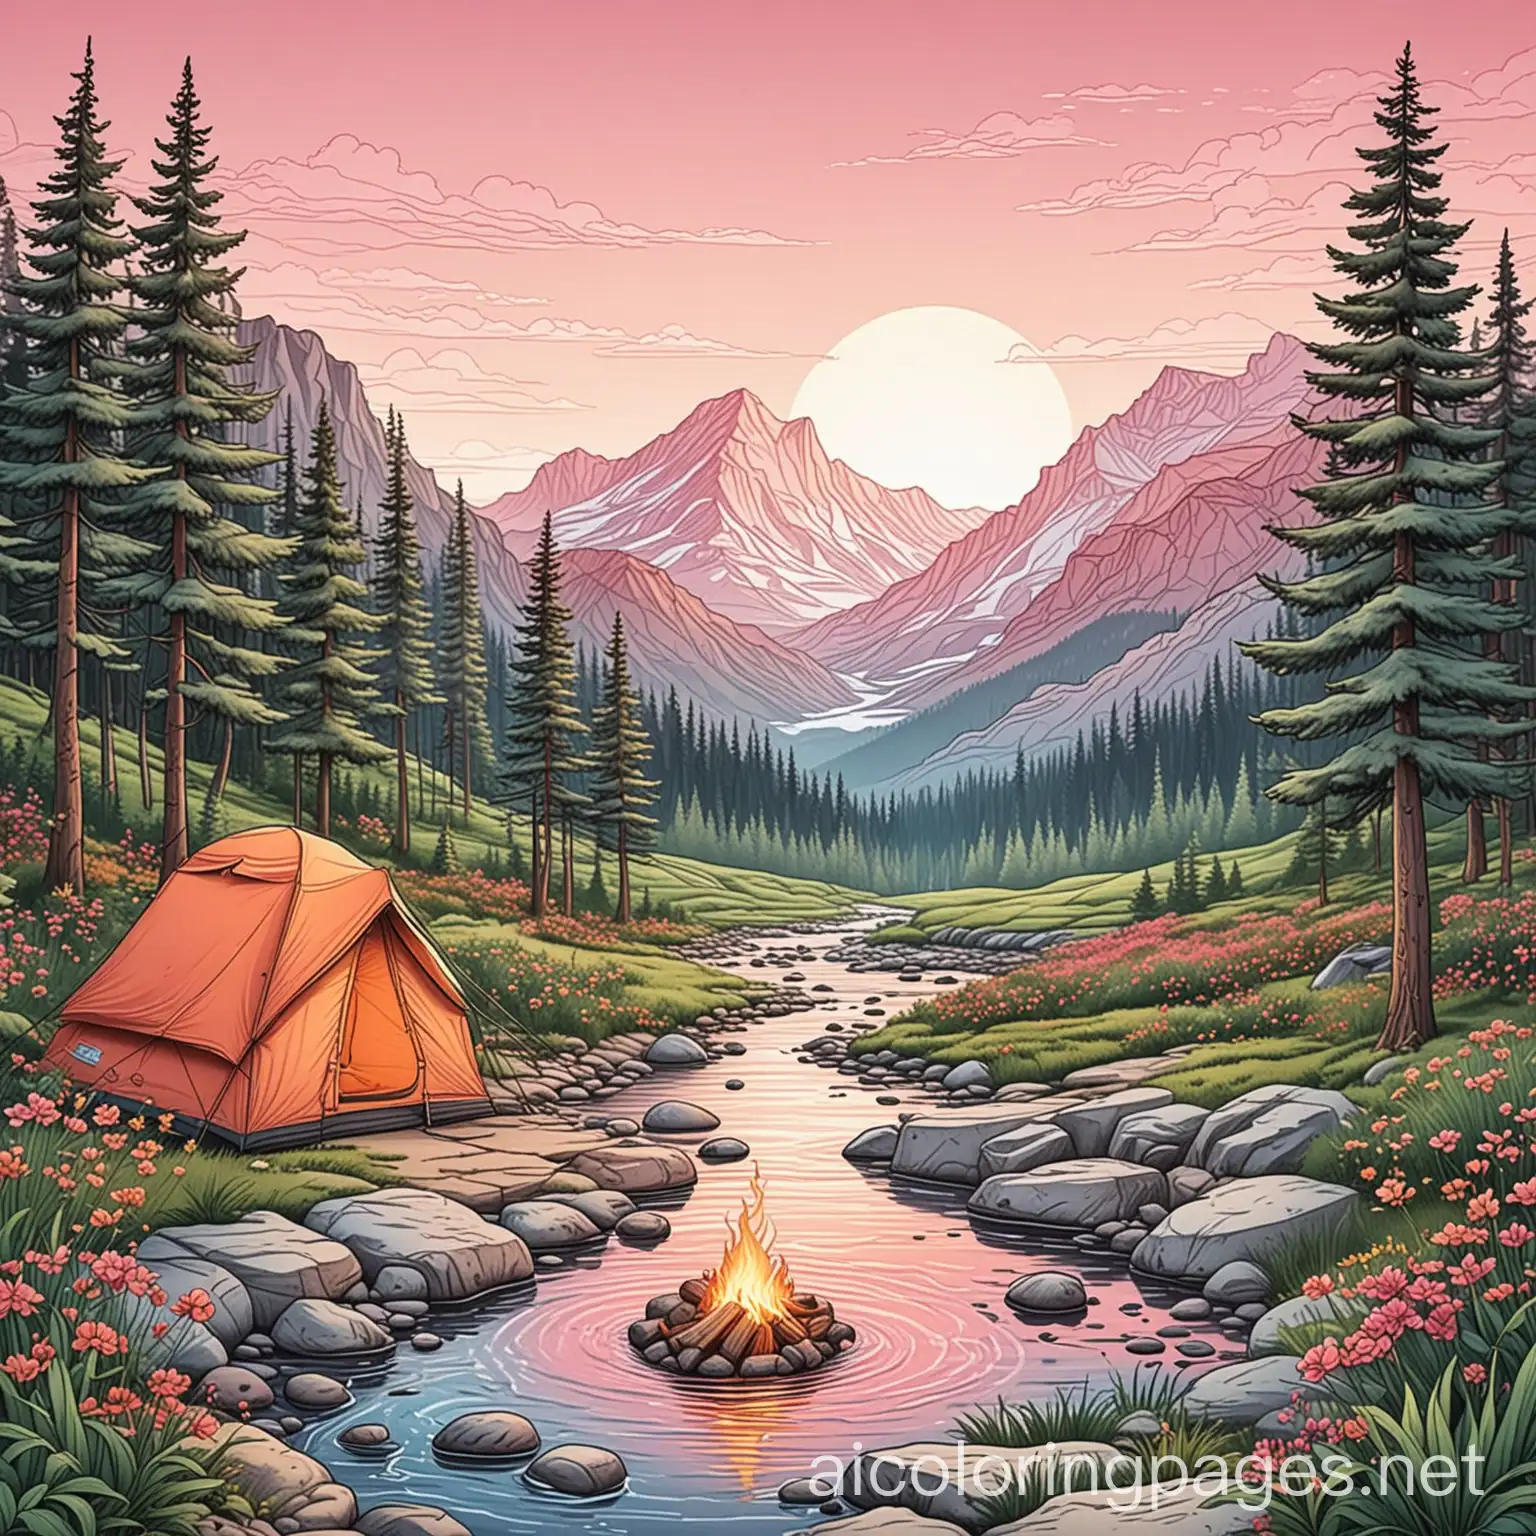 A stunning monoline illustration of a peaceful mountain morning camping scene. The cozy tent is pitched near a babbling brook, with a campfire nearby. The picturesque mountain range in the distance is bathed in warm oranges and pinks, capturing the essence of a vibrant morning sky. The overall design is perfect for t-shirts, stickers, or any other printing needs, highlighting the essence of outdoor adventure and tranquility., Coloring Page, black and white, line art, white background, Simplicity, Ample White Space. The background of the coloring page is plain white to make it easy for young children to color within the lines. The outlines of all the subjects are easy to distinguish, making it simple for kids to color without too much difficulty